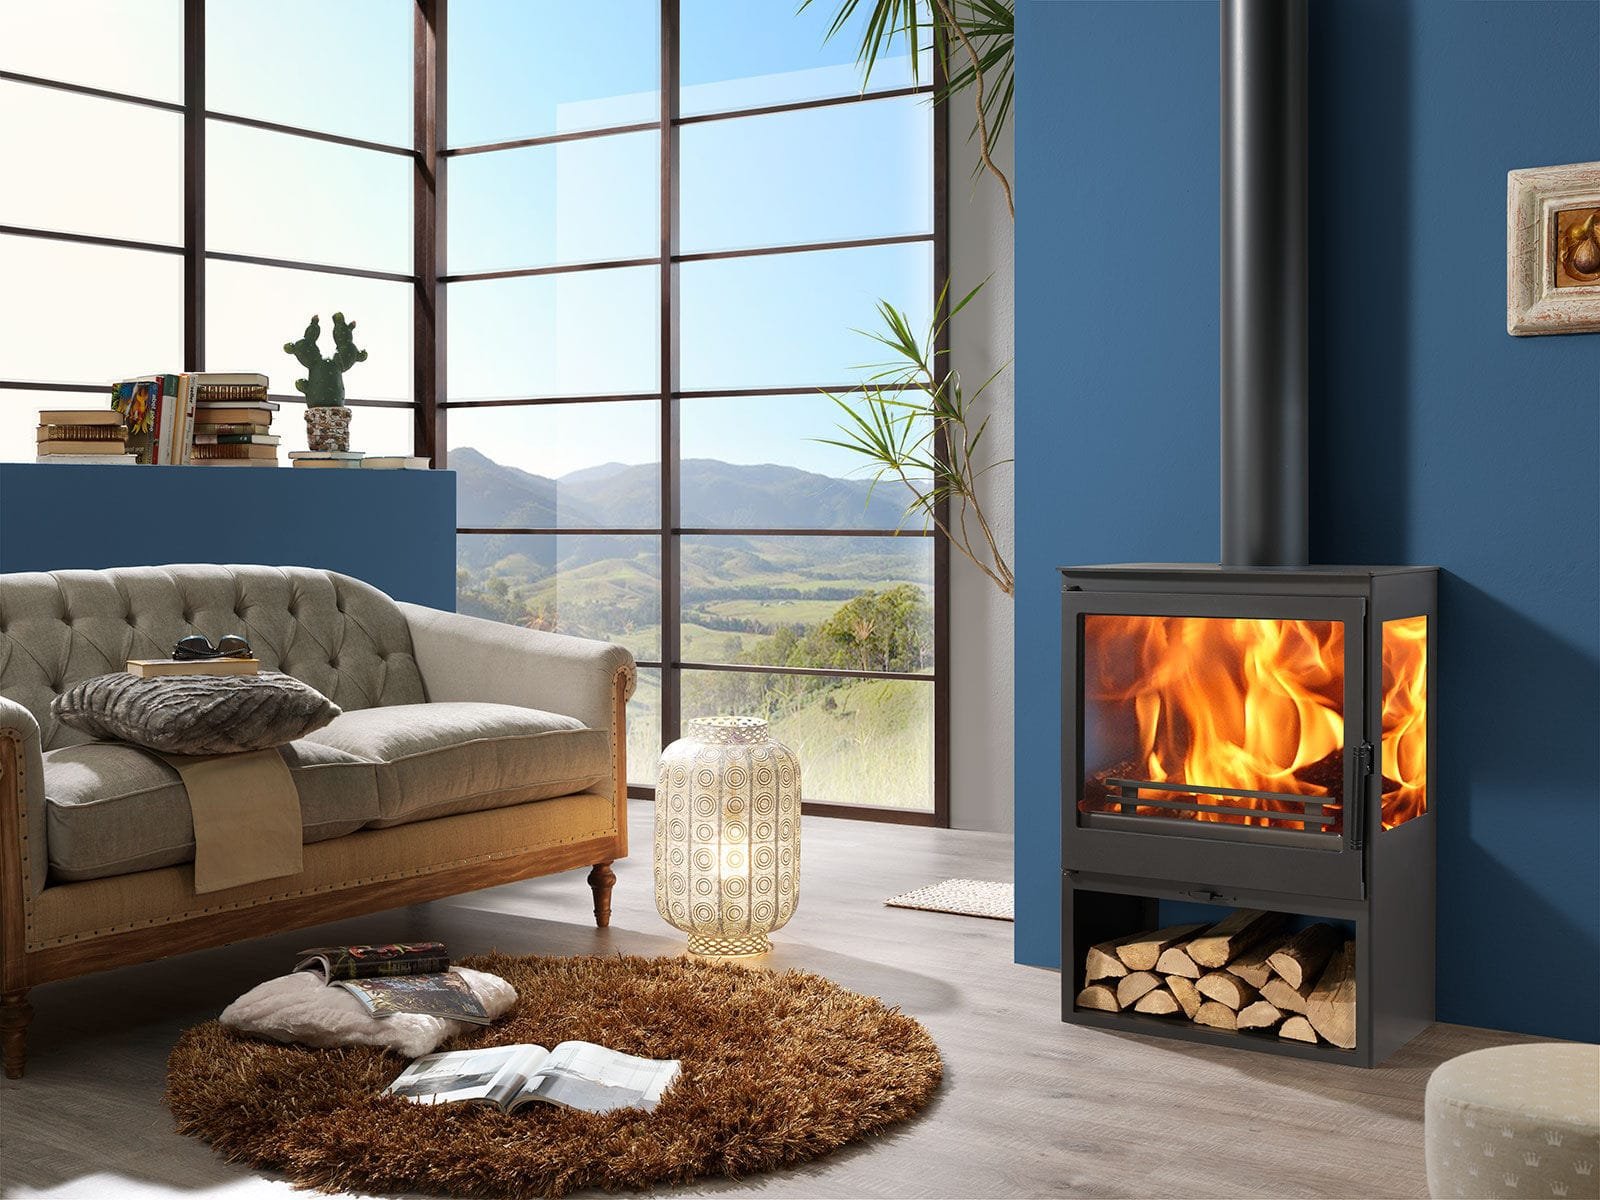 Modern wood burning stoves are real classics with a rustic charm